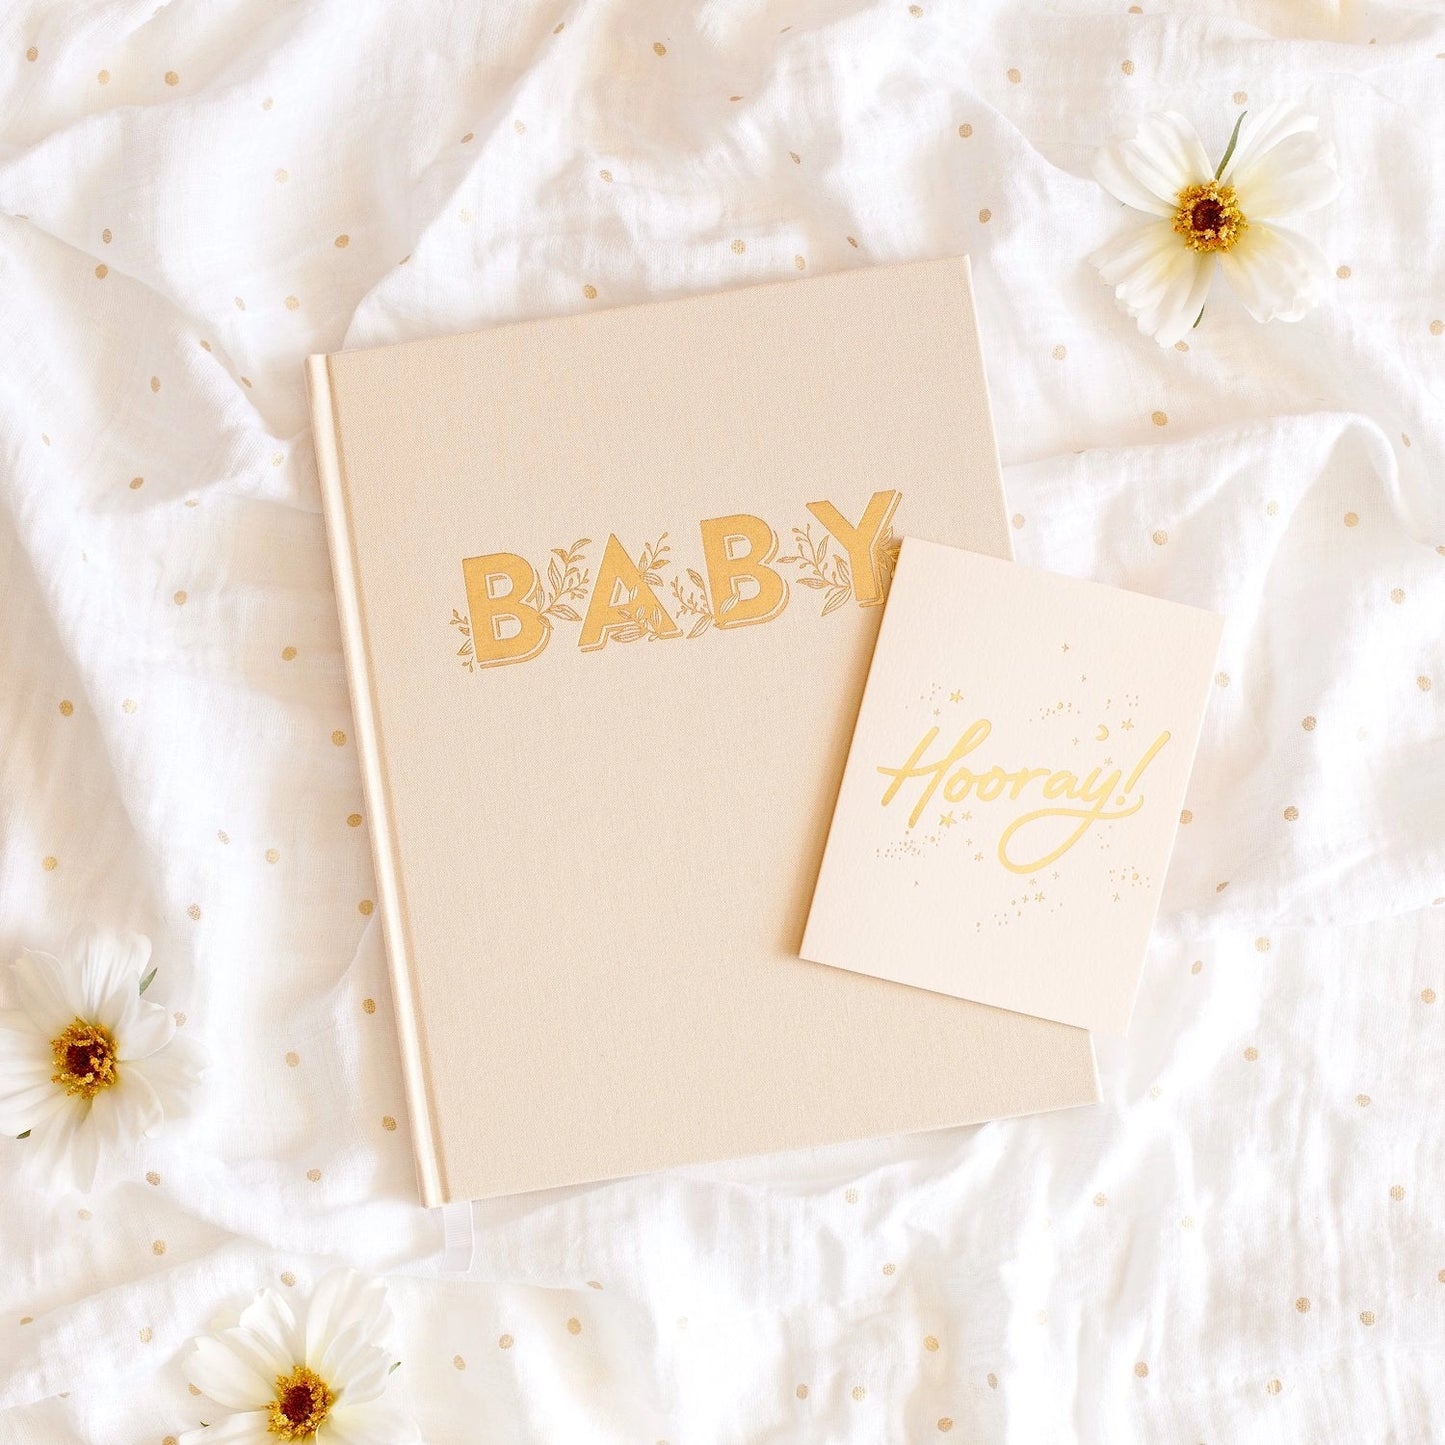 How to use baby book journal. The best baby book in Australia. Fow and Fallow Baby Book Buttermilk first five years memory. Pregnant Labour Birth Postpartum Essential - Dear Mama Store Australia. Free shipping available.